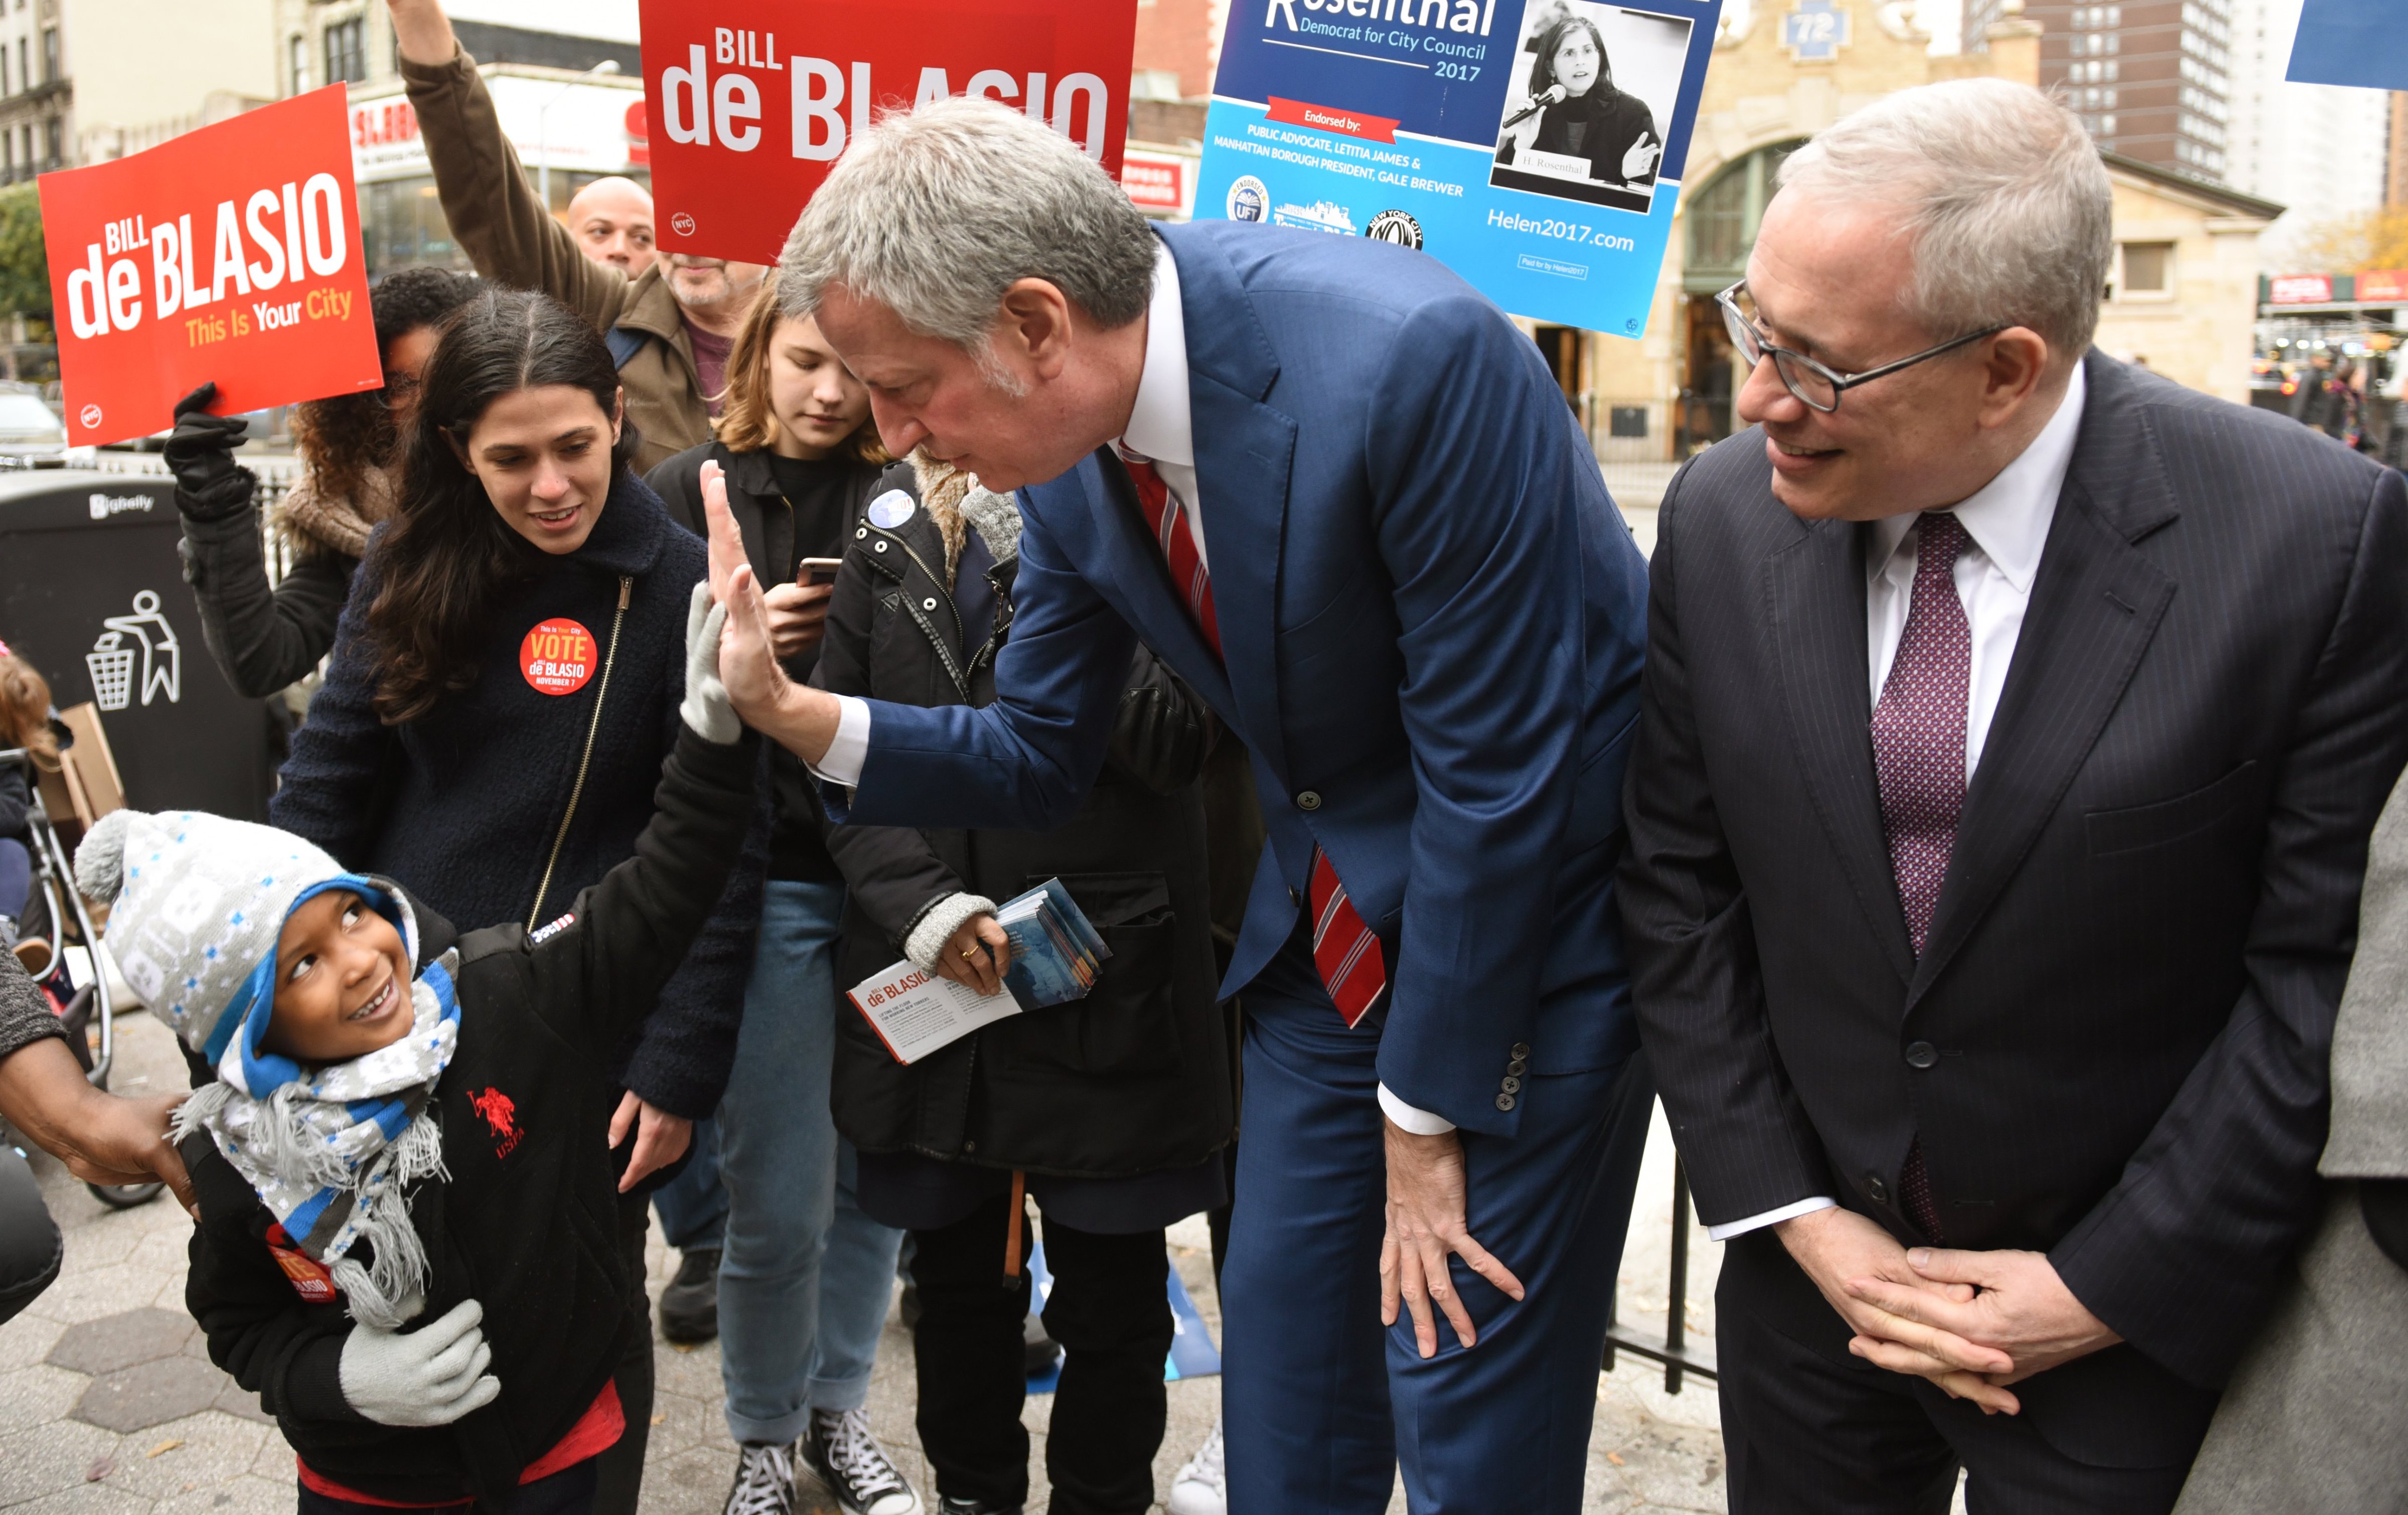 New York City Mayor Bill de Blasio greets people in New York on Nov. 7, 2017. (Timothy A. Clary—AFP/Getty Images)